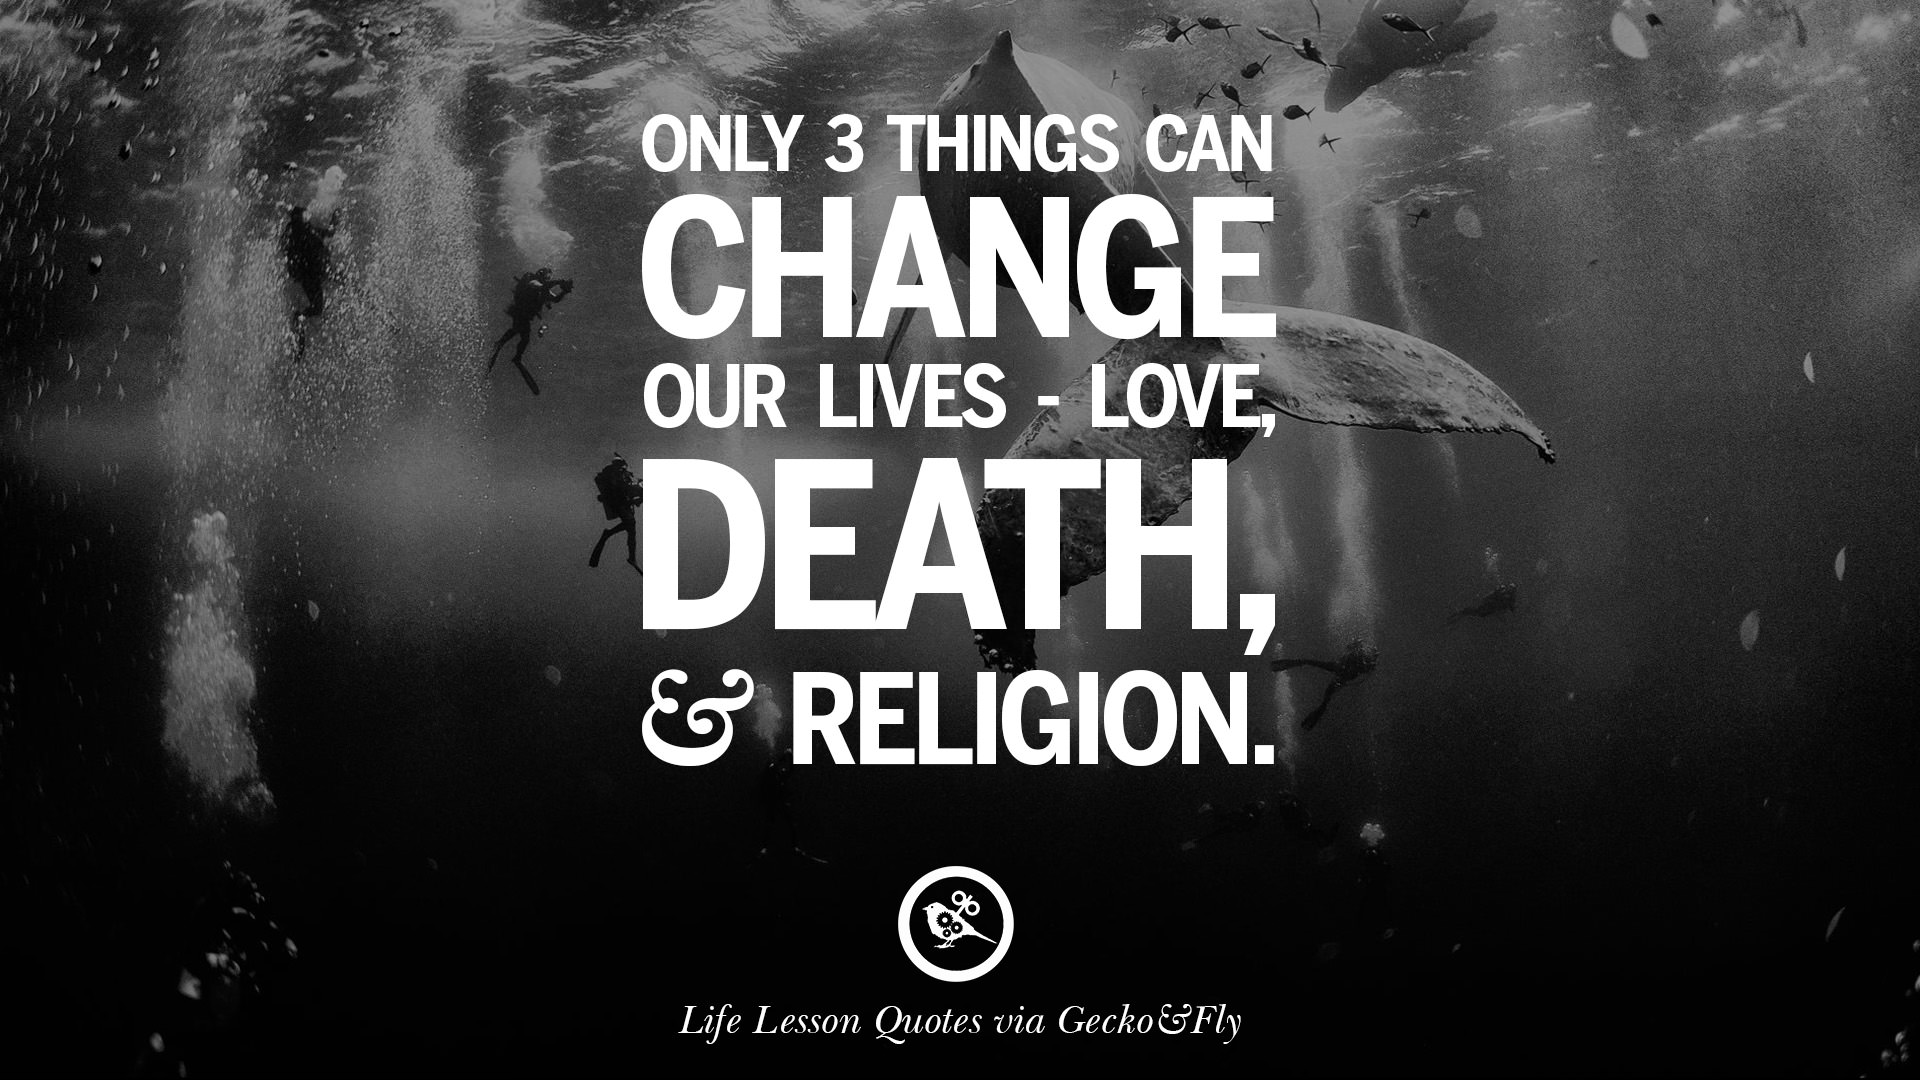 ly 3 things can change our lives – love and religion